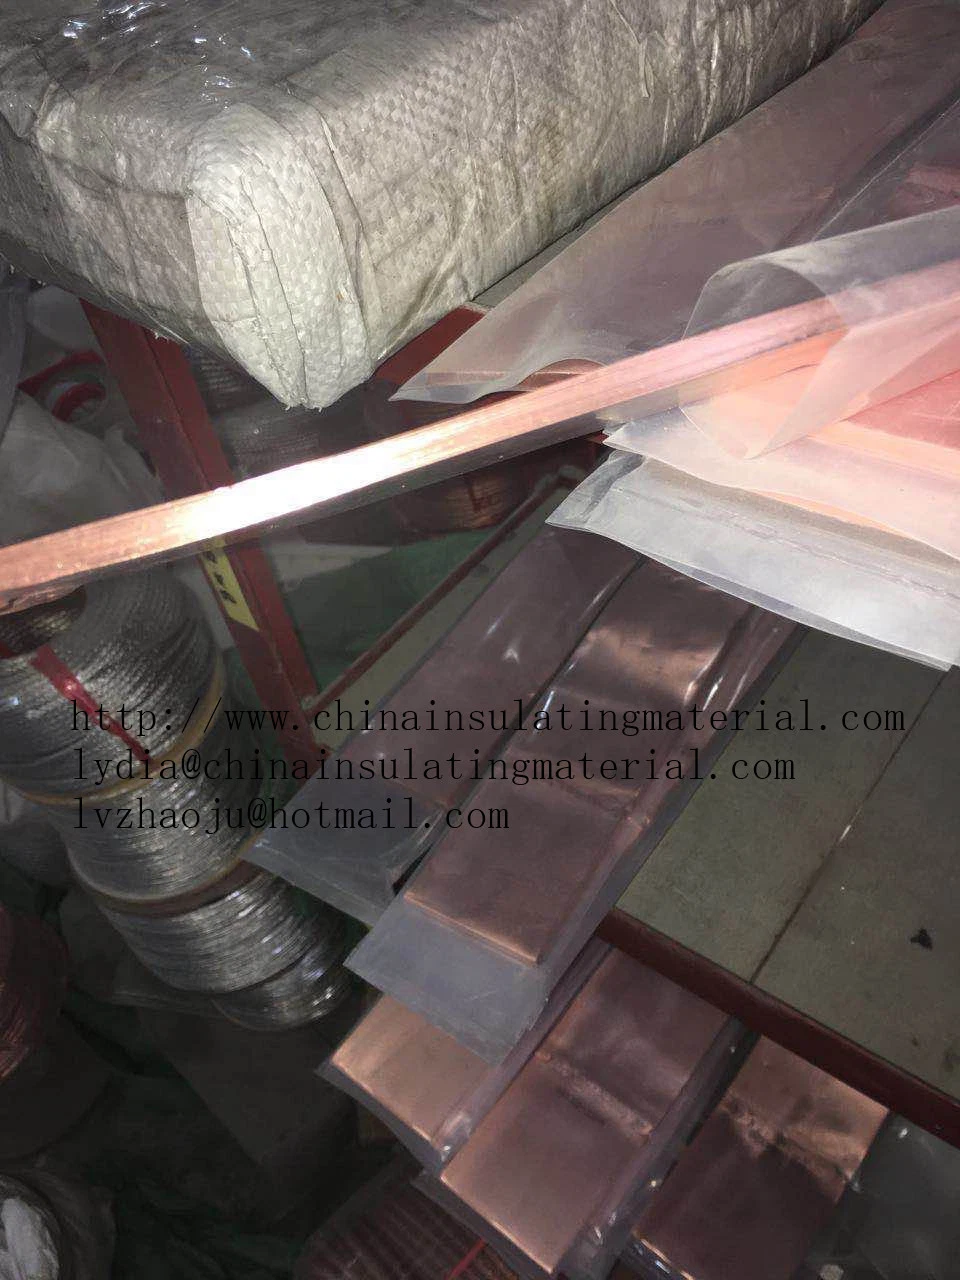 Flexible Laminated Copper High Temperature and Large Current Connector